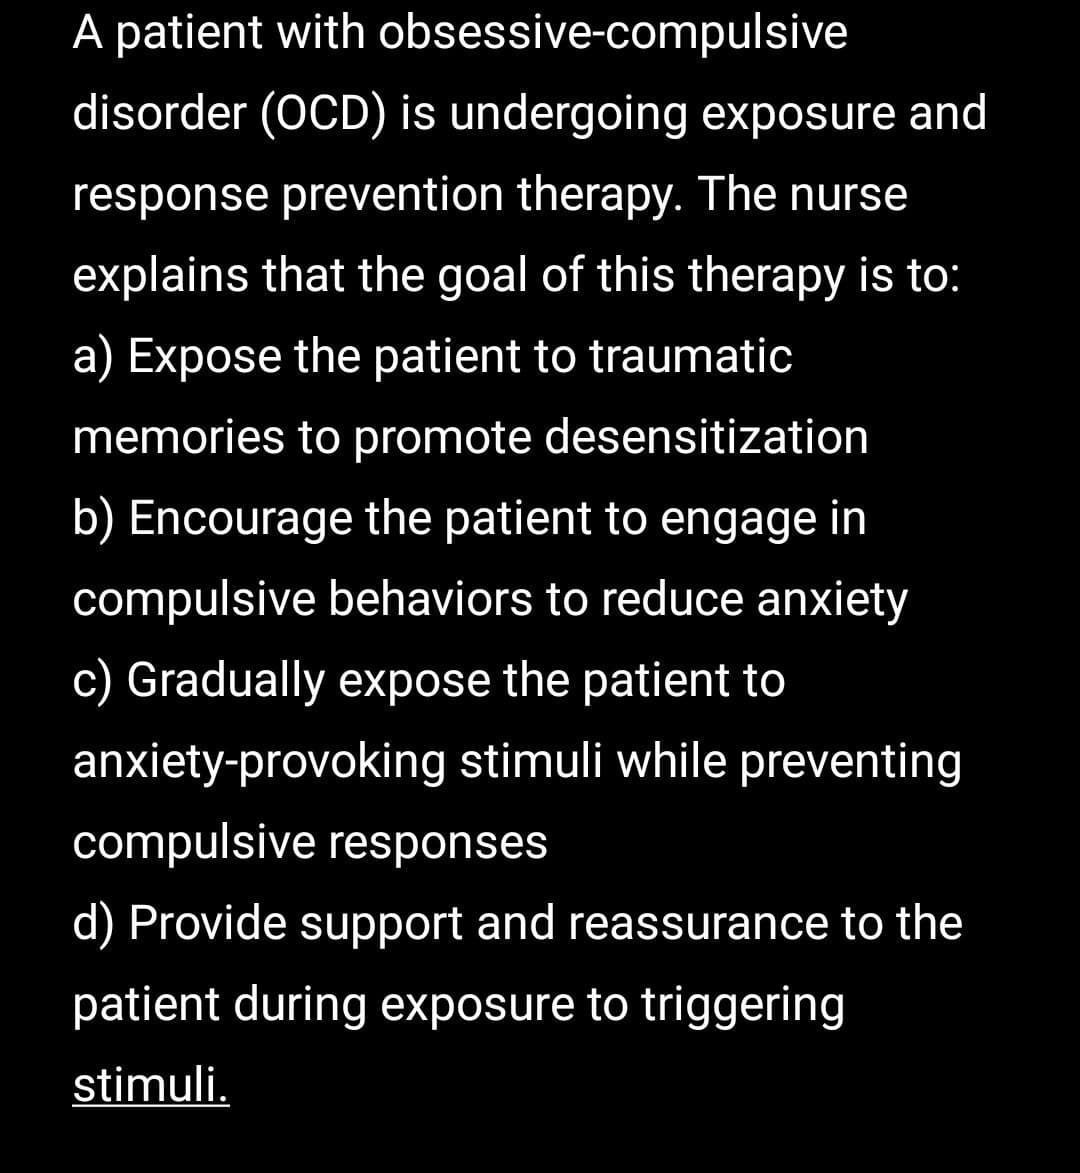 A patient with obsessive-compulsive
disorder (OCD) is undergoing exposure and
response prevention therapy. The nurse
explains that the goal of this therapy is to:
a) Expose the patient to traumatic
memories to promote desensitization
b) Encourage the patient to engage in
compulsive behaviors to reduce anxiety
c) Gradually expose the patient to
anxiety-provoking stimuli while preventing
compulsive responses
d) Provide support and reassurance to the
patient during exposure to triggering
stimuli.